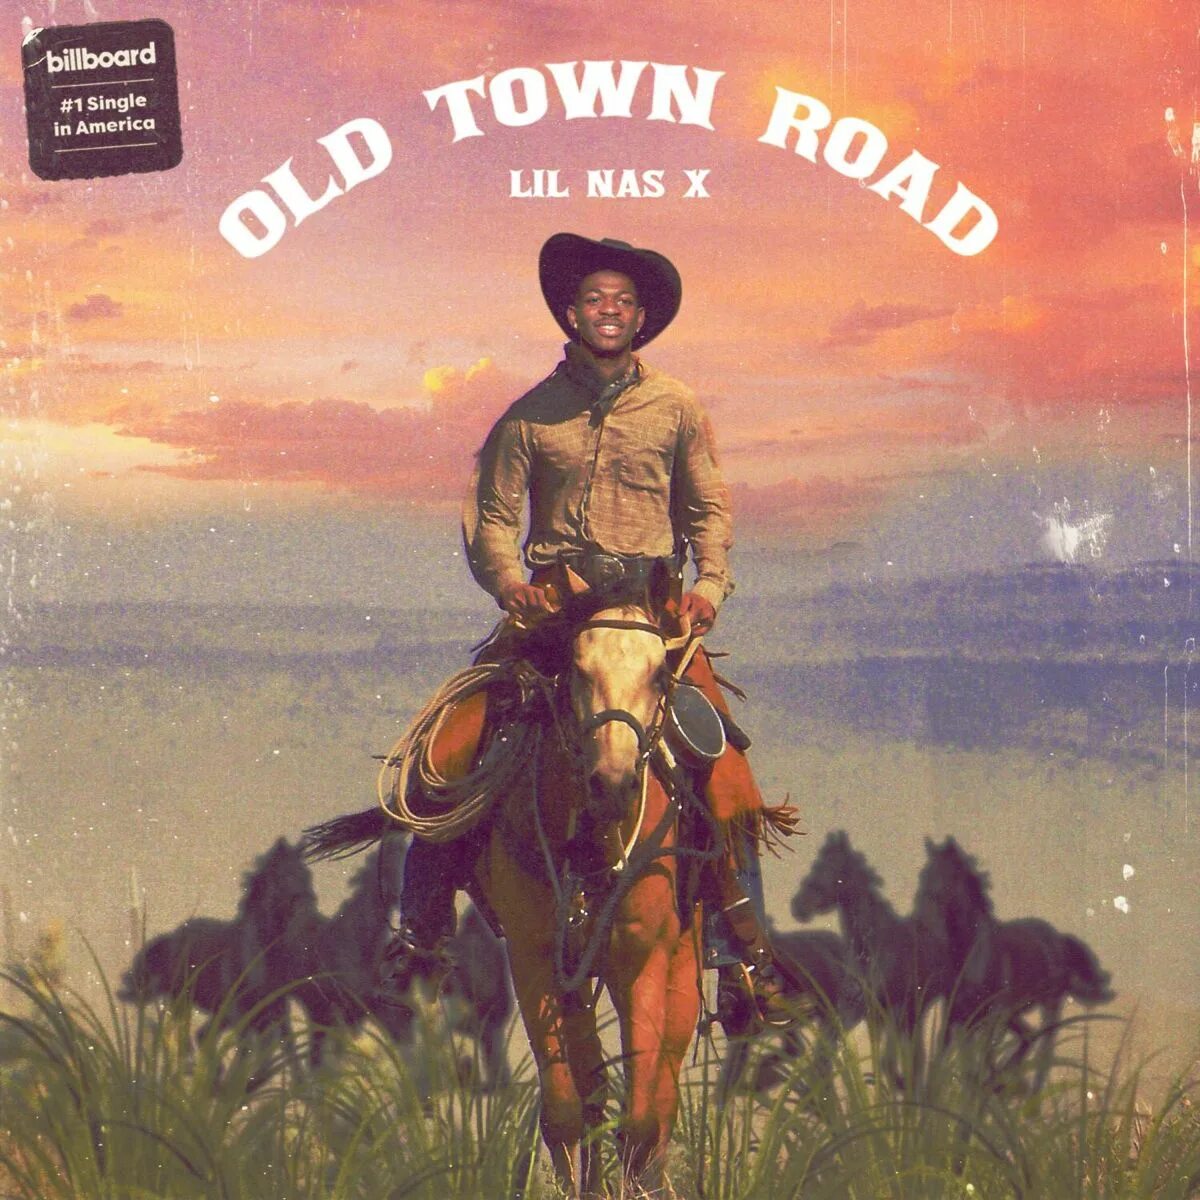 Old town road horses. Lil nas x old Town Road. Old Town Road обложка. Lil nas x - old Town Road ft. Billy ray Cyrus. Old Town Road Remix обложка.